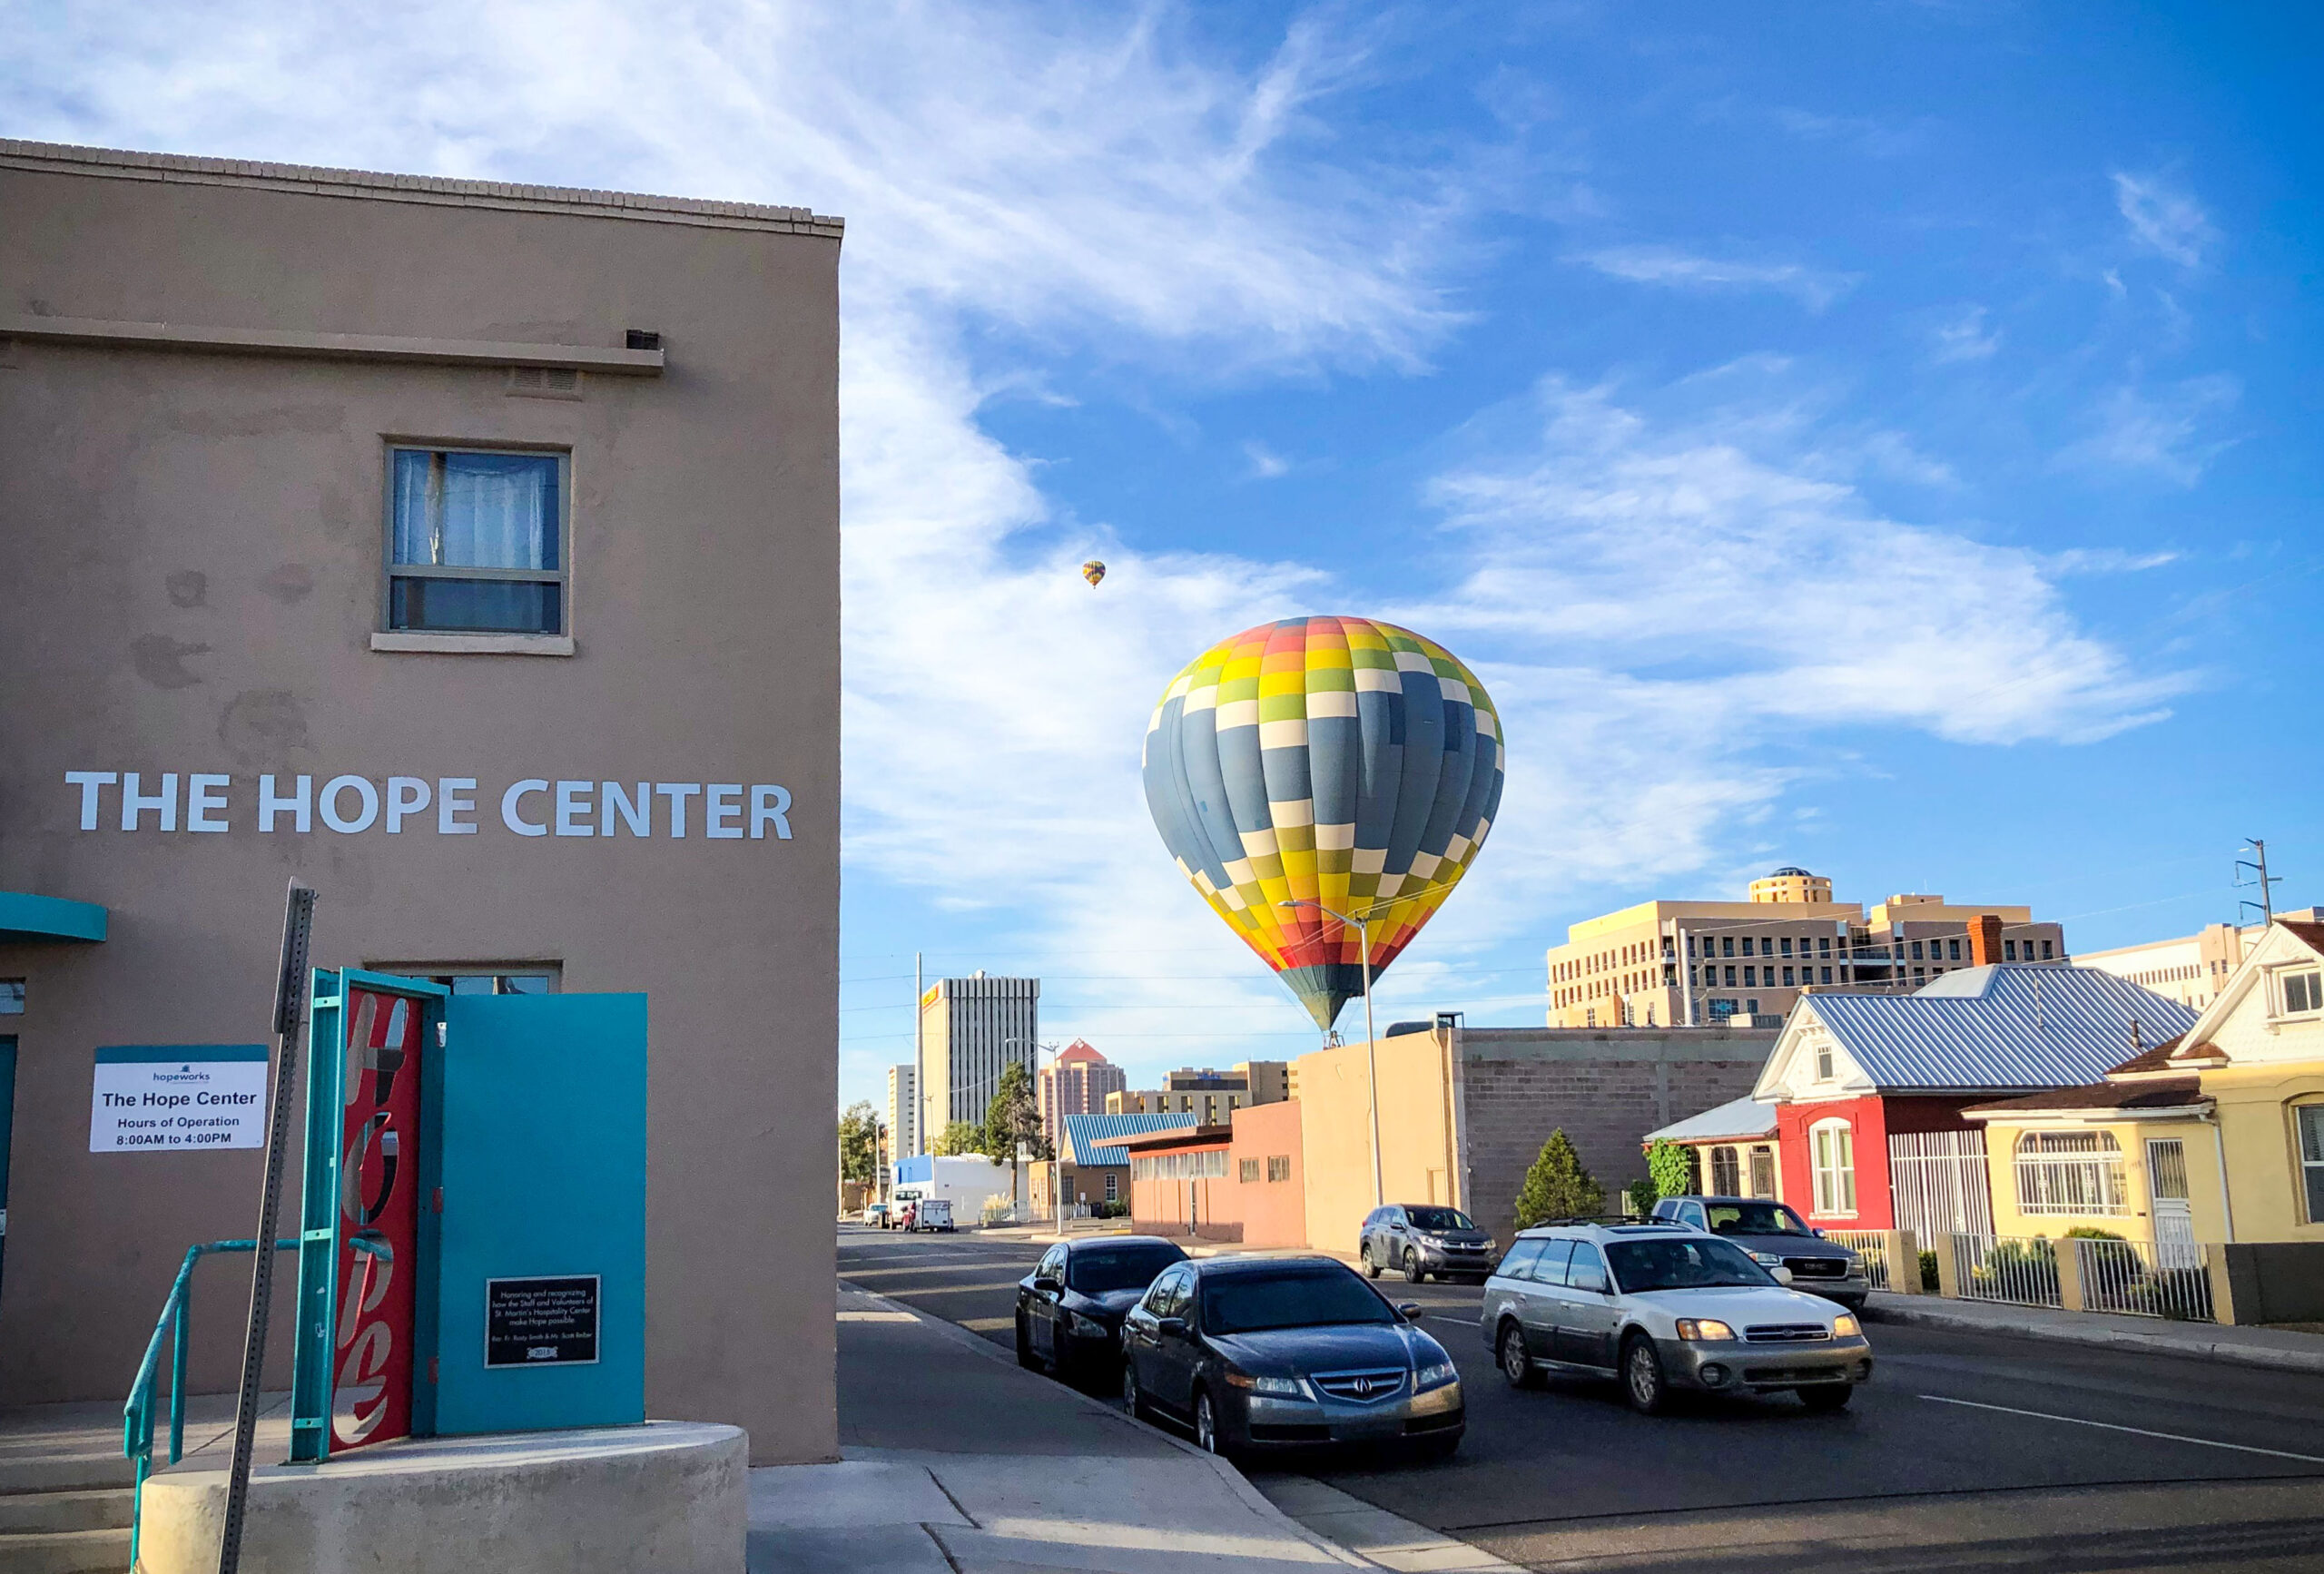 A multicolored hot air balloon floats above the adobe-colored Hope Center on a clear day.